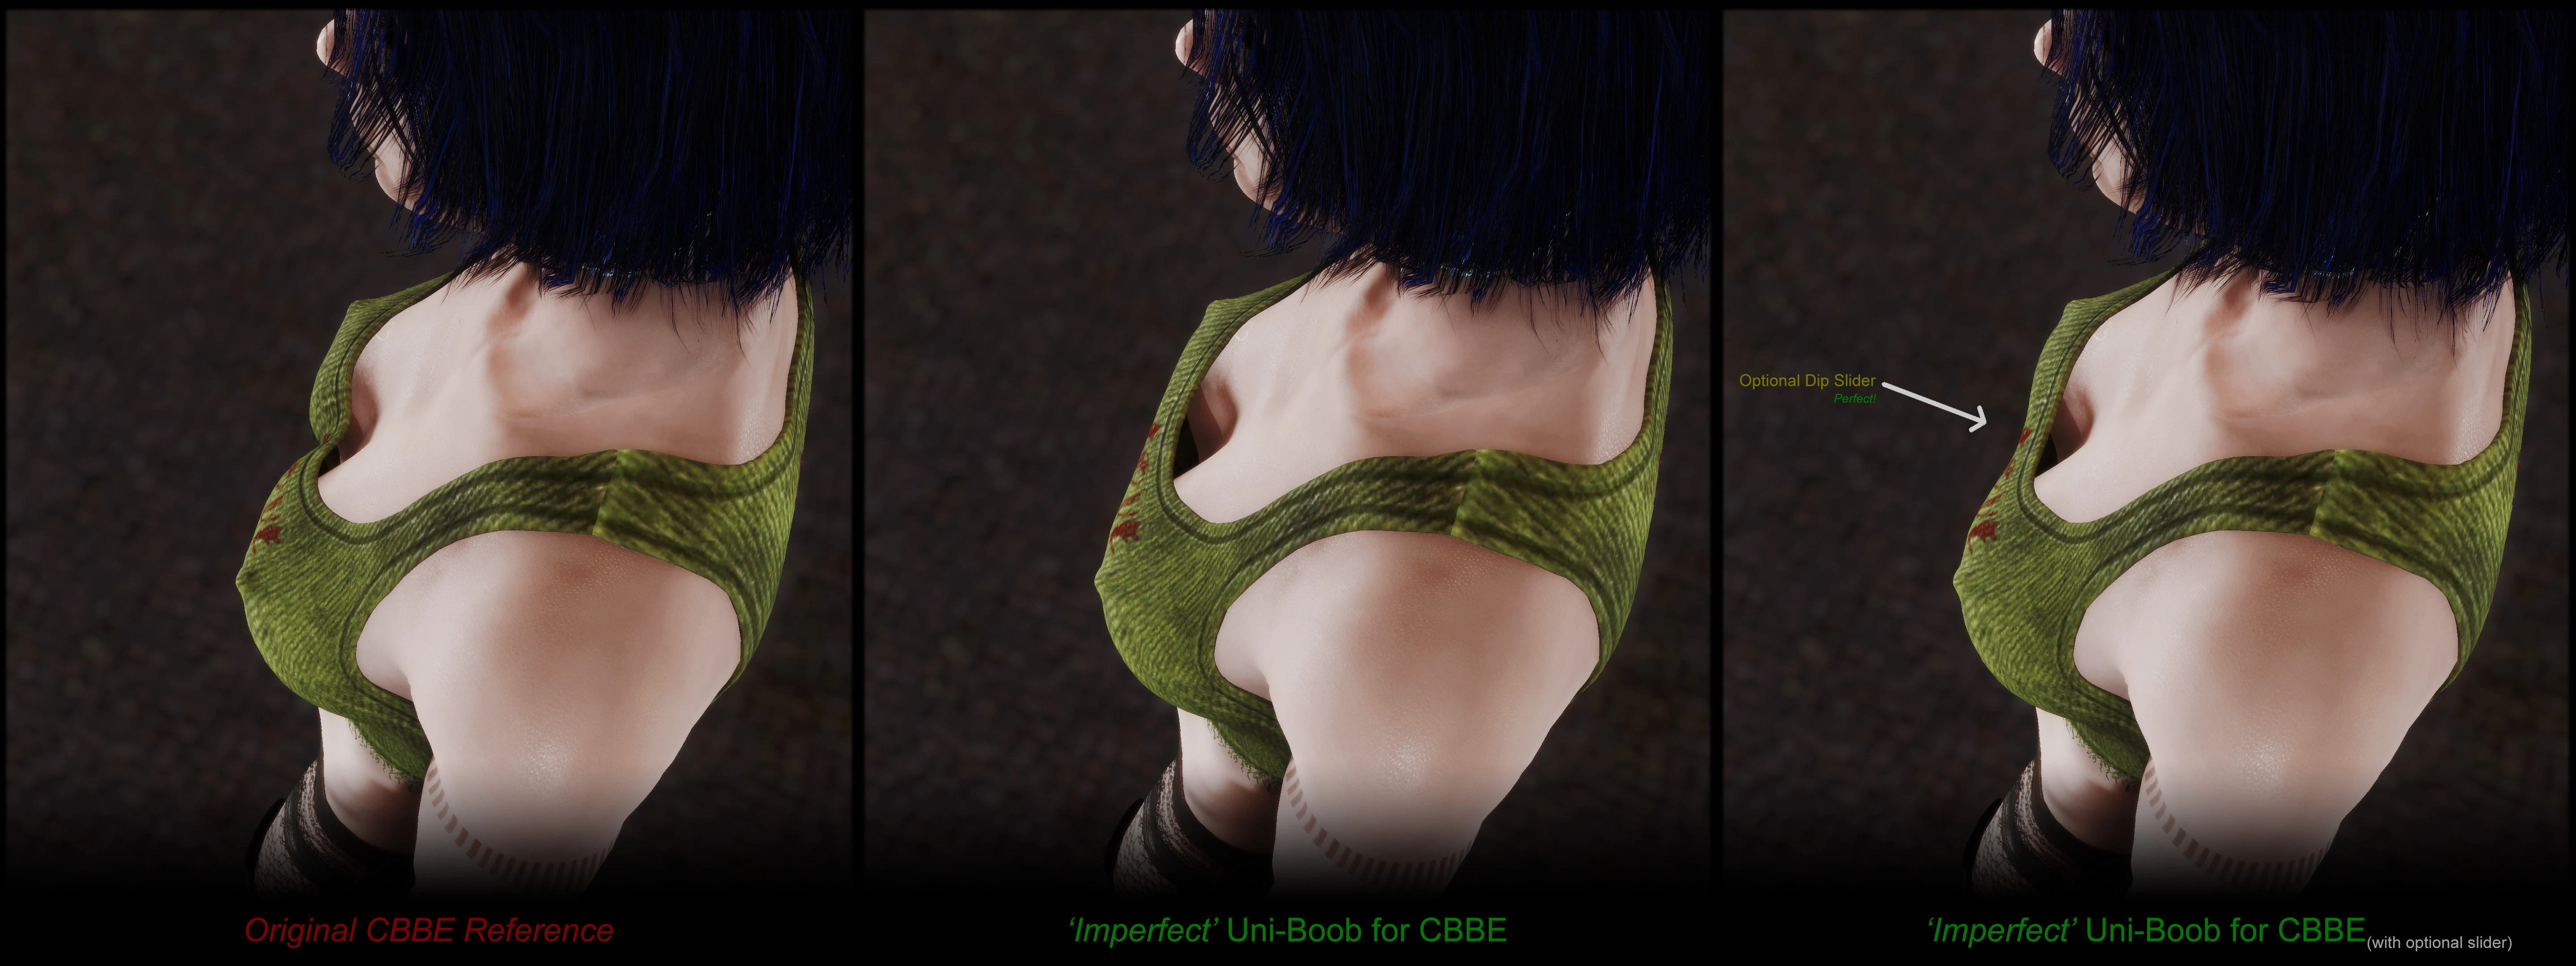 Fallout 4 and Boobs #justice 